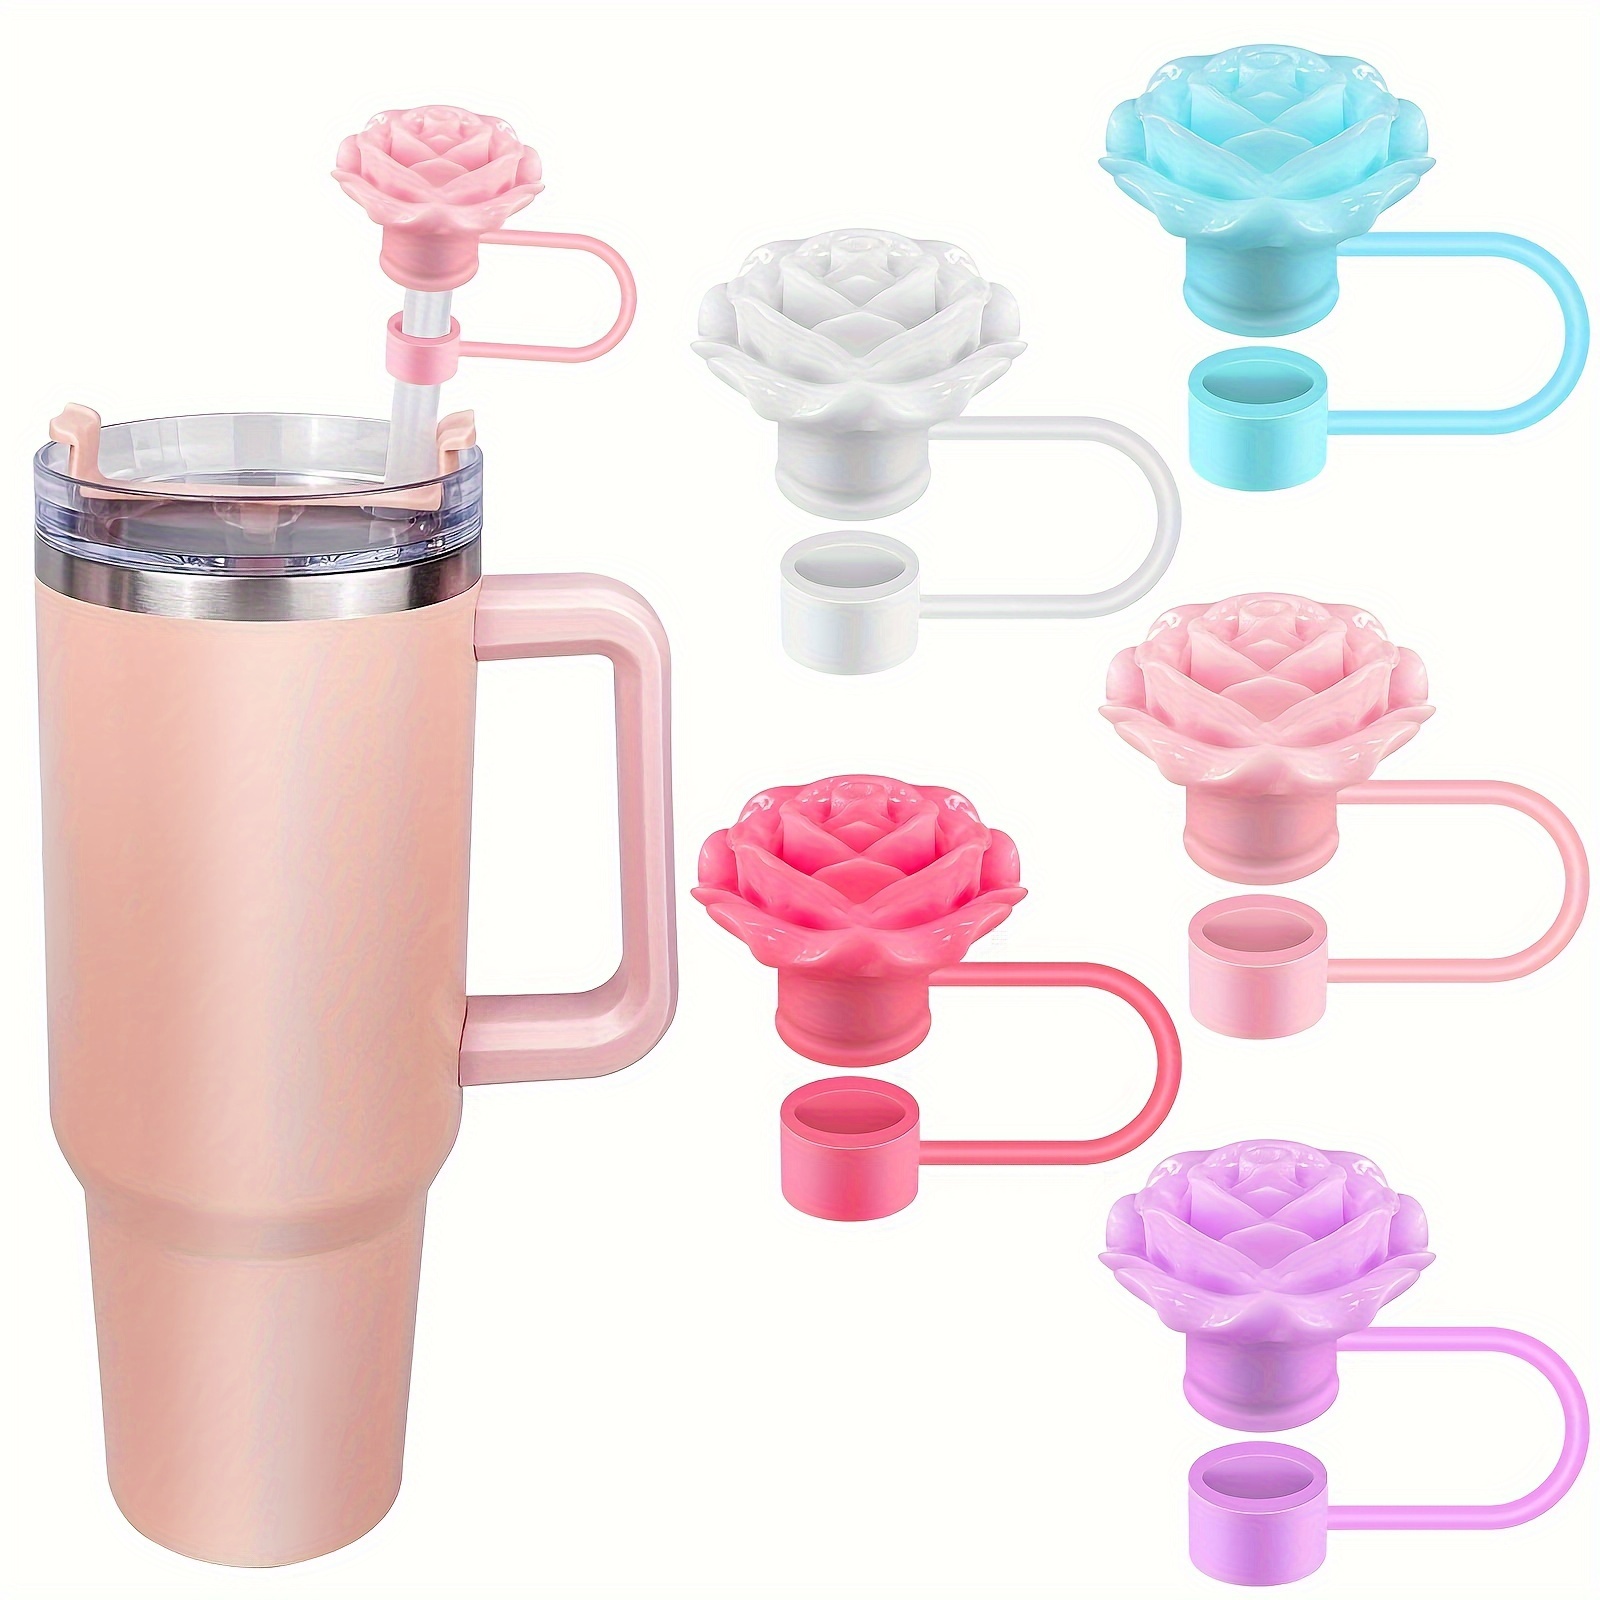 

5-pack Rose Flower Silicone Straw Covers For Stanley Cups - Reusable, Bpa-free Toppers Fits 0.4" Straws, Perfect For Parties & Outdoor Fun Straw Toppers For Tumblers Cup Straw Cover